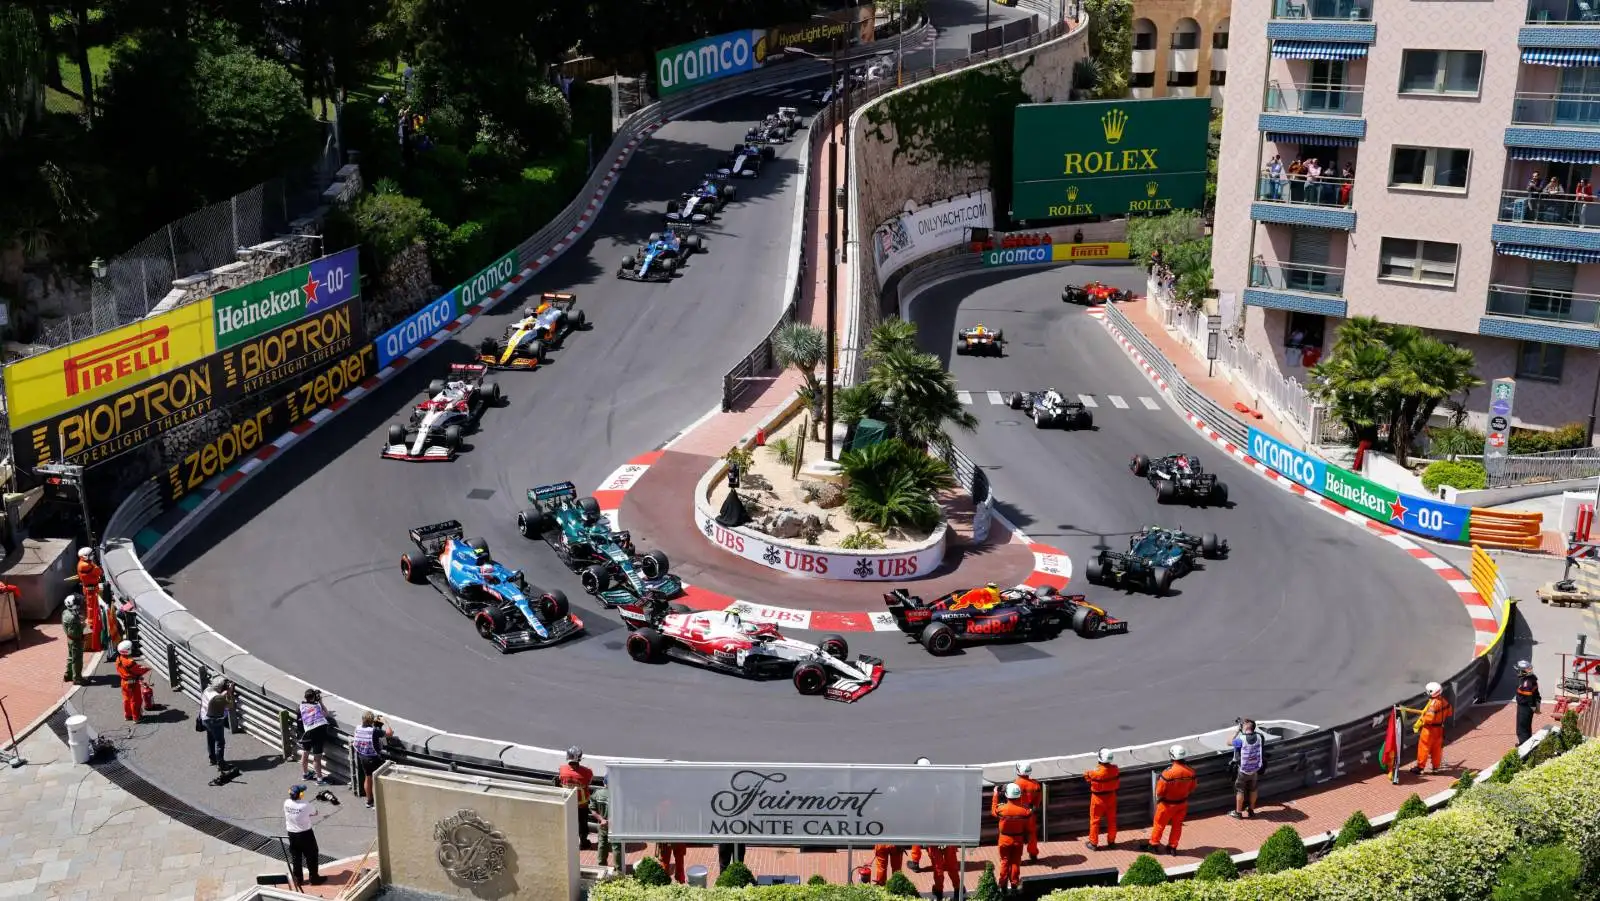 Hairpin during the Monaco GP. Monte Carlo May 2021.